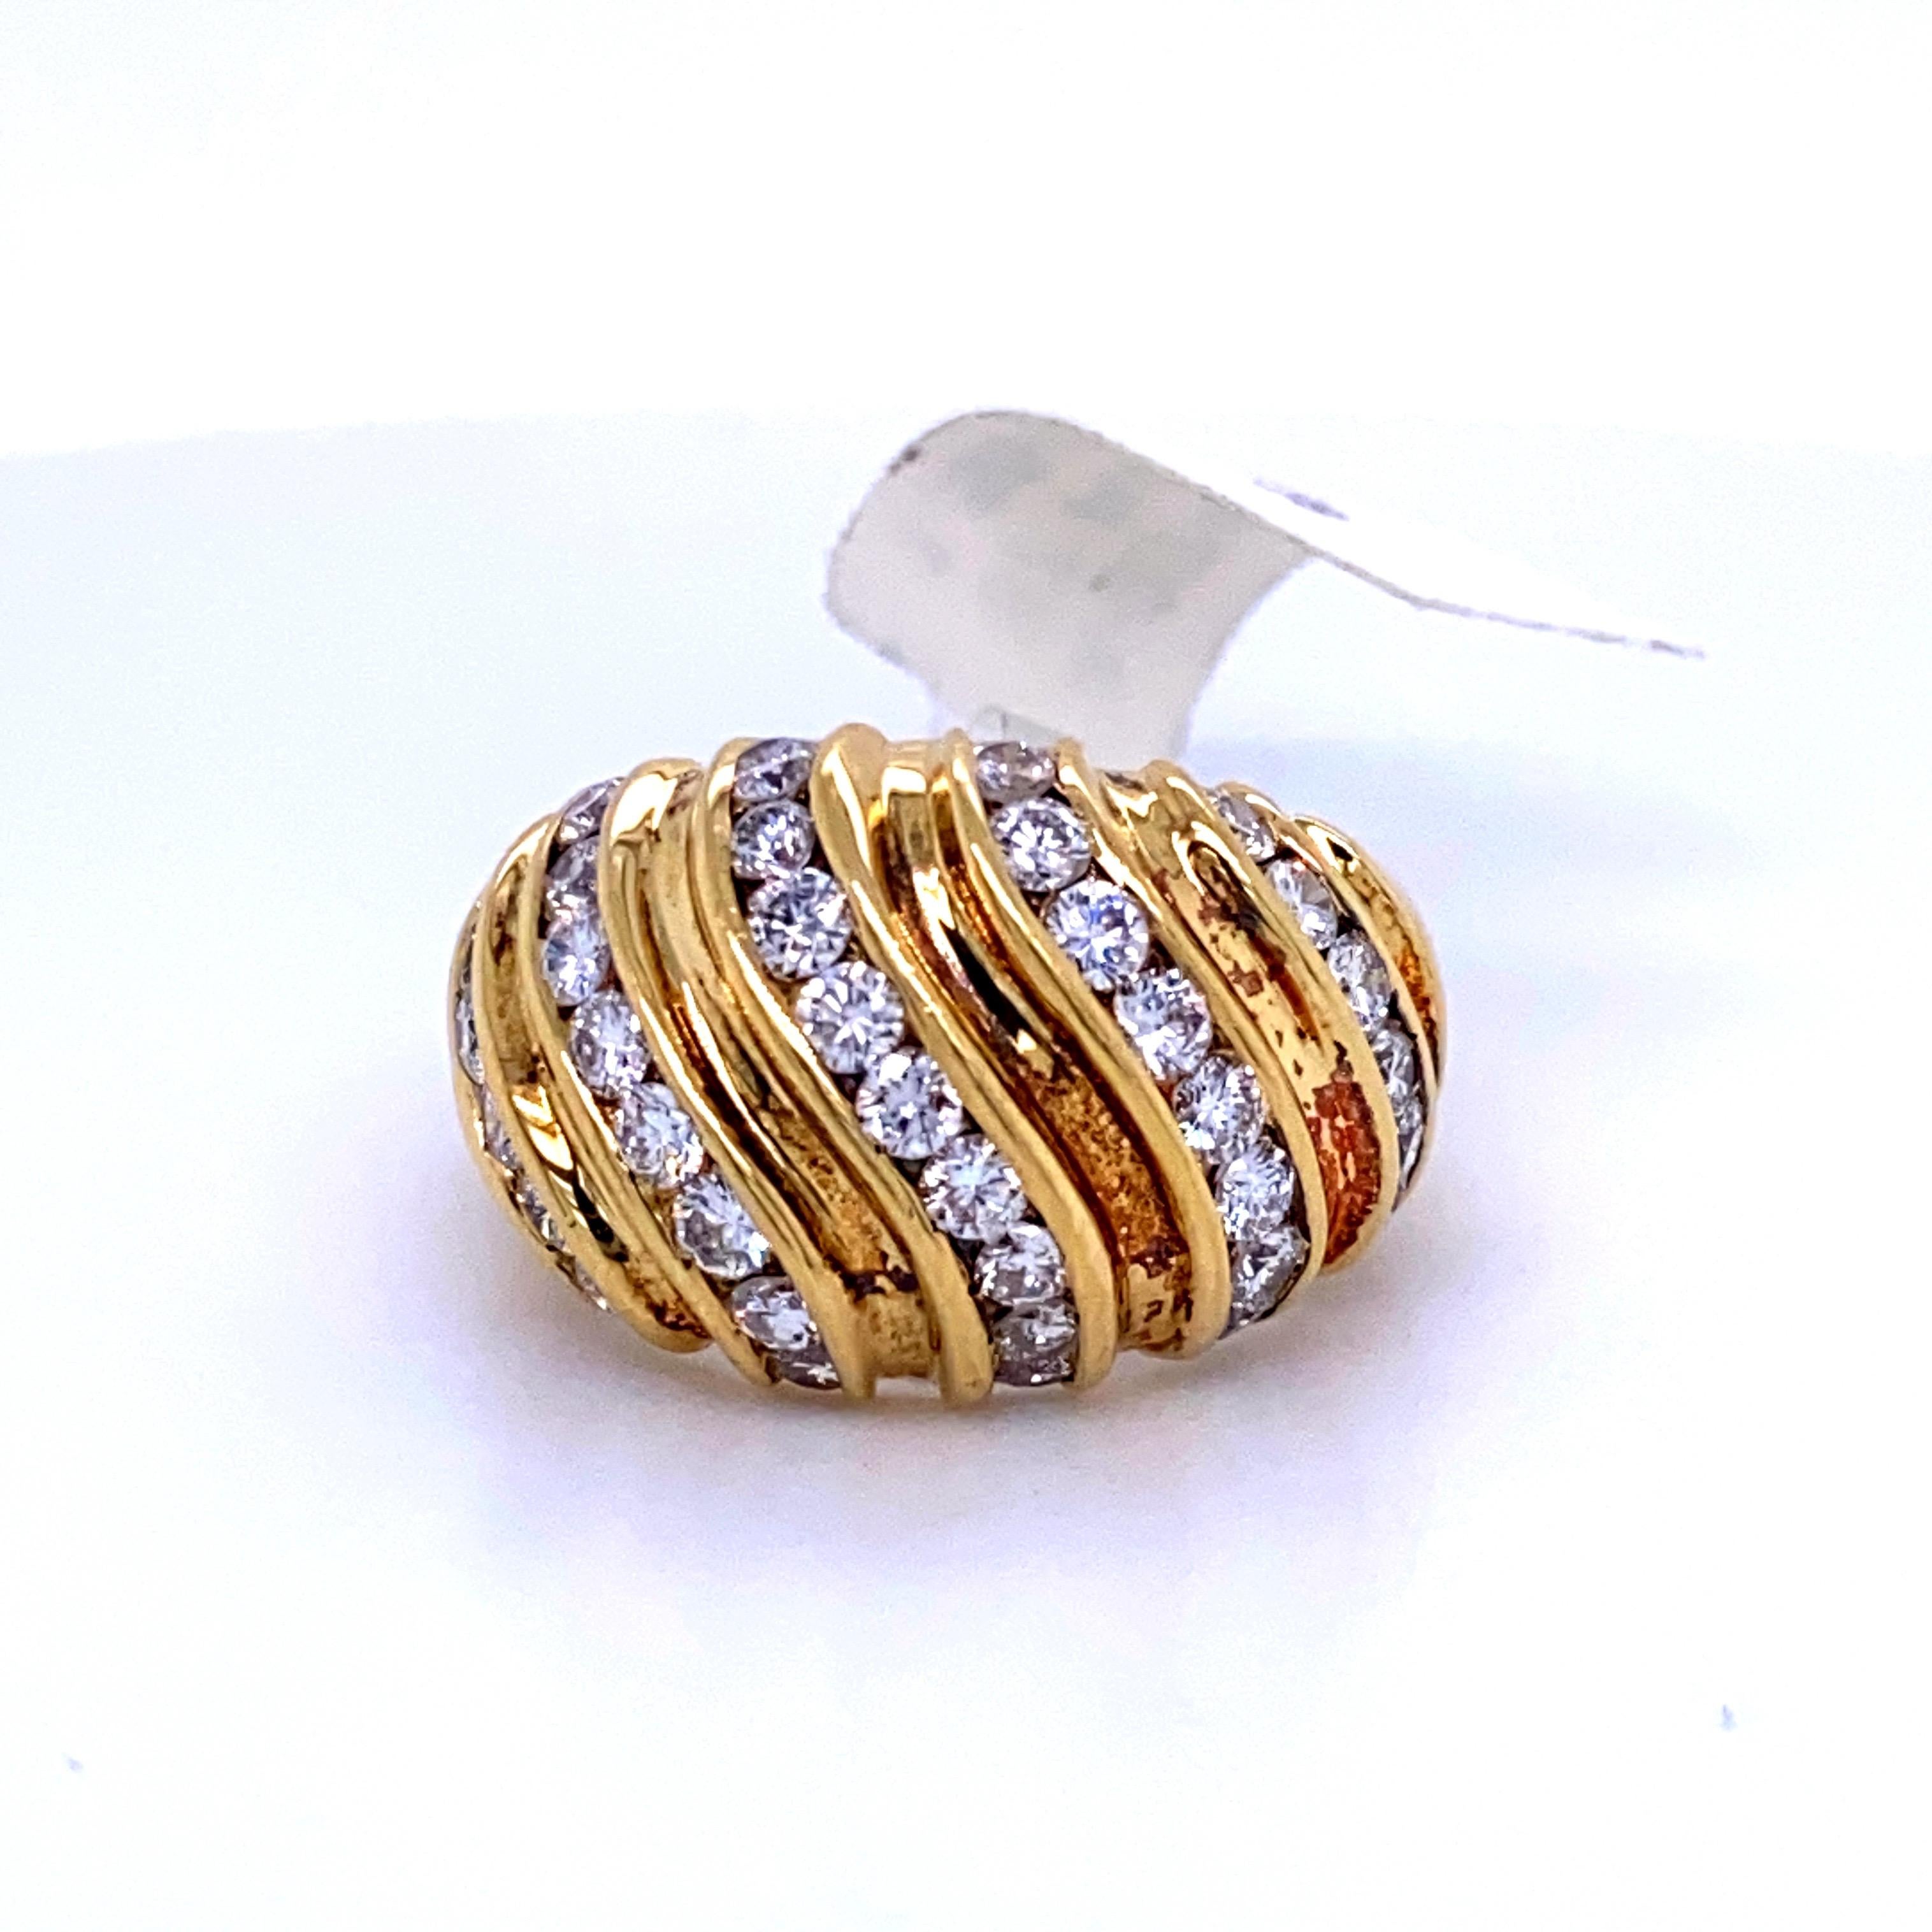 18K Yellow gold dome ring featuring 37 round brilliants weighing 1.55 carats. 
Average Stone: 0.04 cts
Color G
Clarity SI

Size 6.5, 
Can be sized free of charge